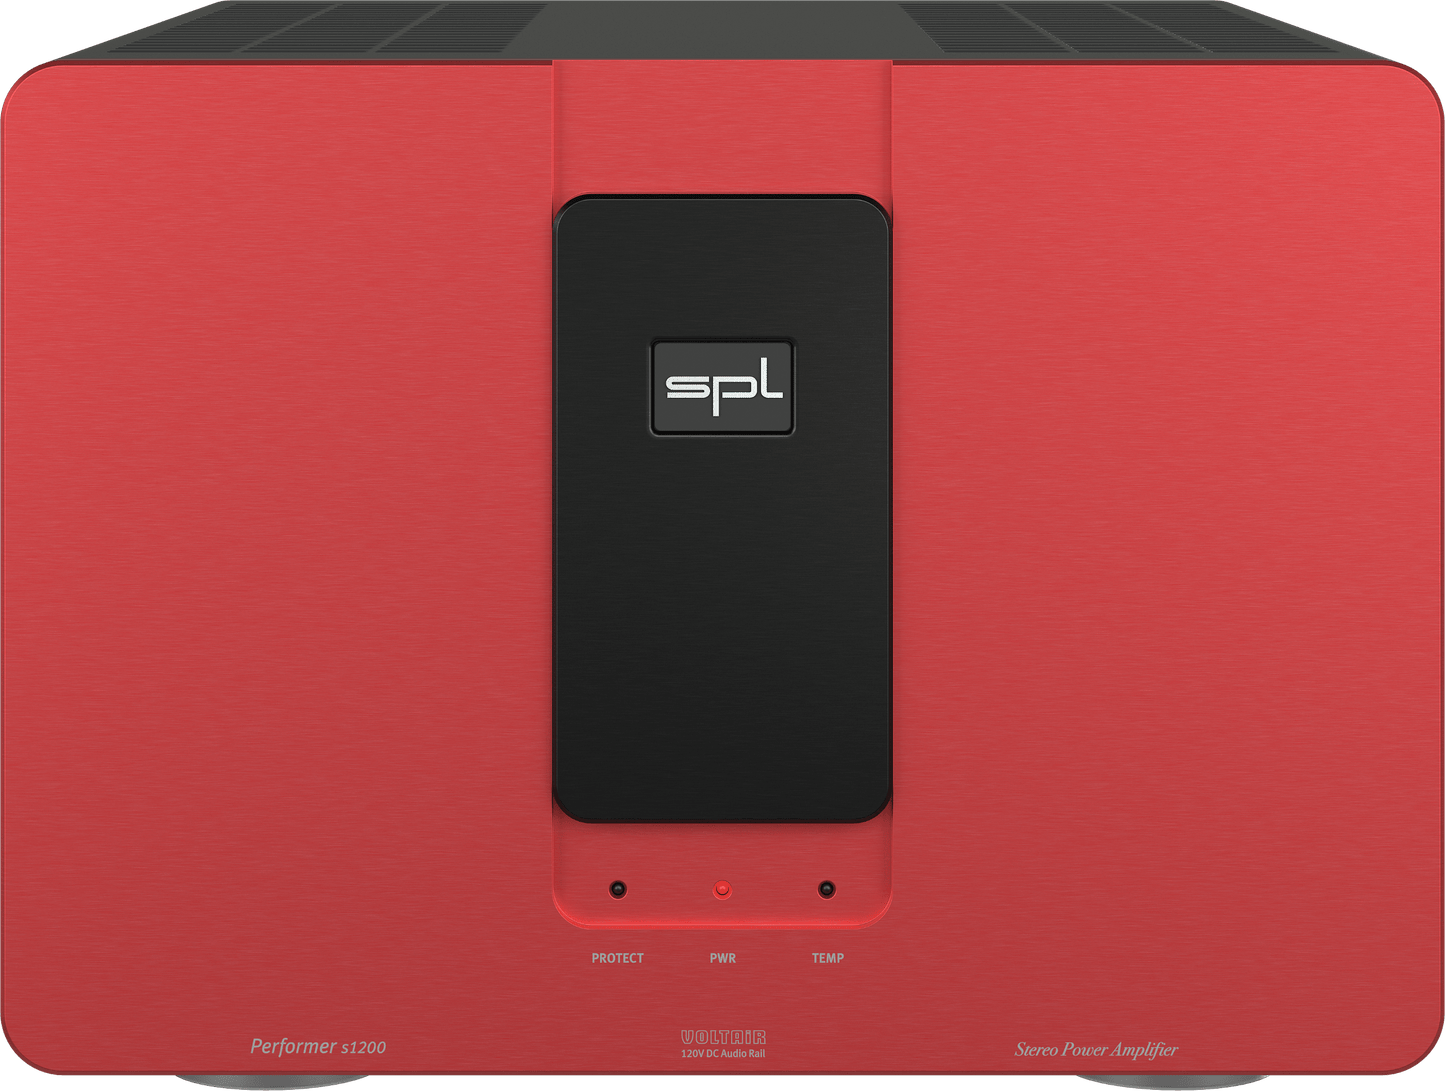 SPL Audio Performer s1200 Stereo Power Amplifier in red with black insert